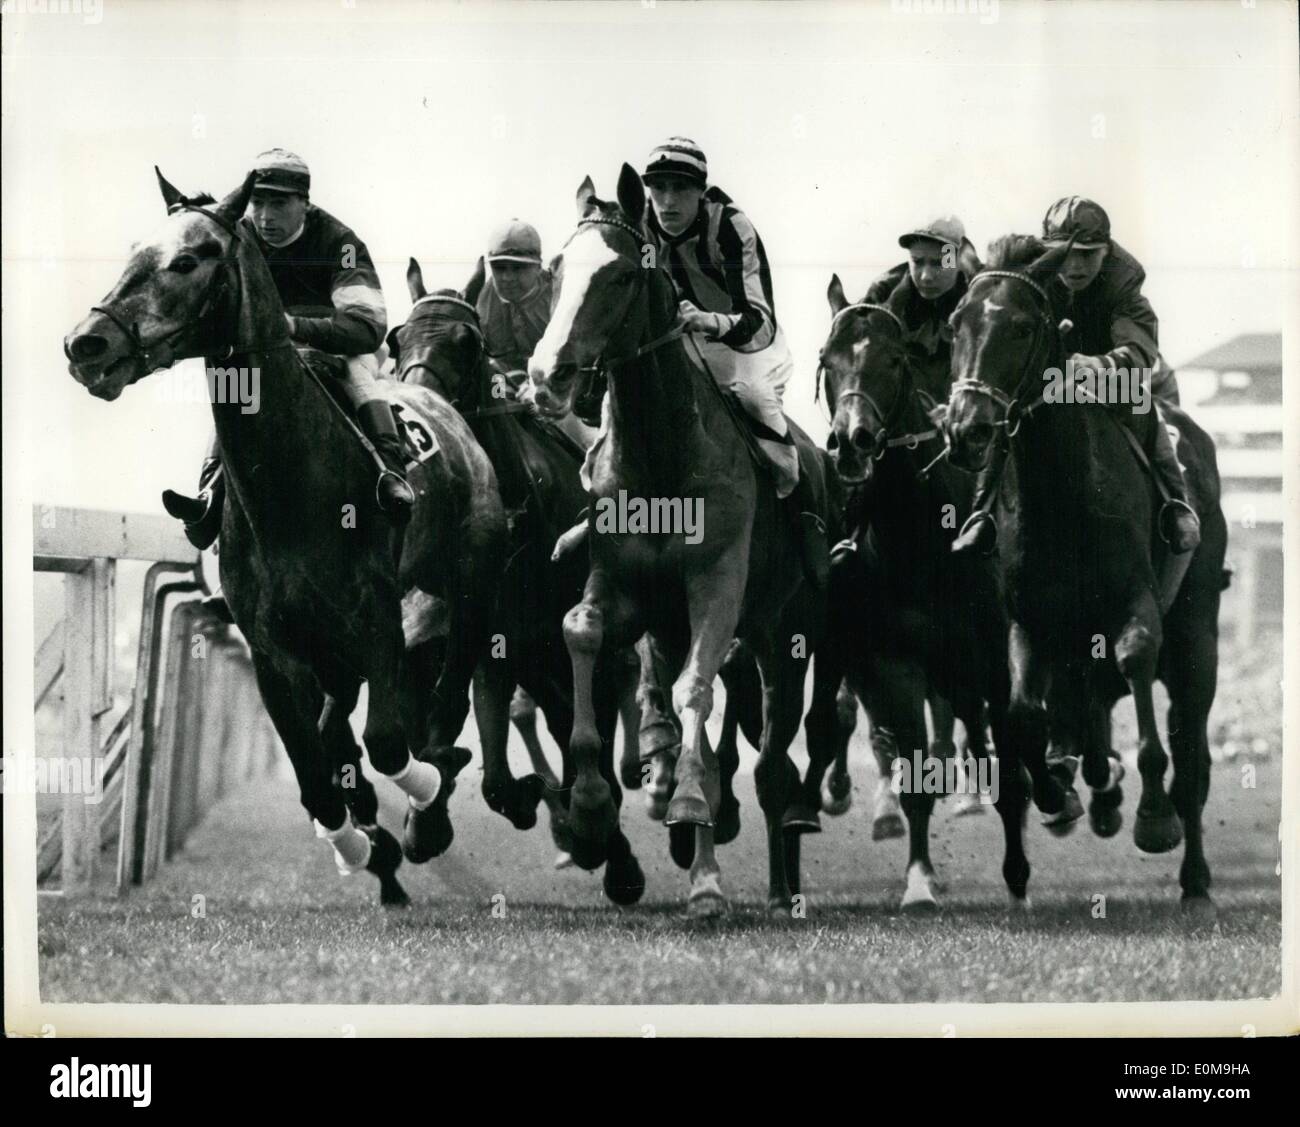 Apr. 04, 1954 - Five Horses - and forty- four hooves: photo shows Five horses that are really eleven horses - the whole field bunched together in a forest of pounding hooves. This was an early moment in the Great Metropolitan Handicap at Epsom Yesterday.(L.to R.) are Kalguli, Nisty Night Evangelist, Pluchind and Lack of Lamb. Stock Photo